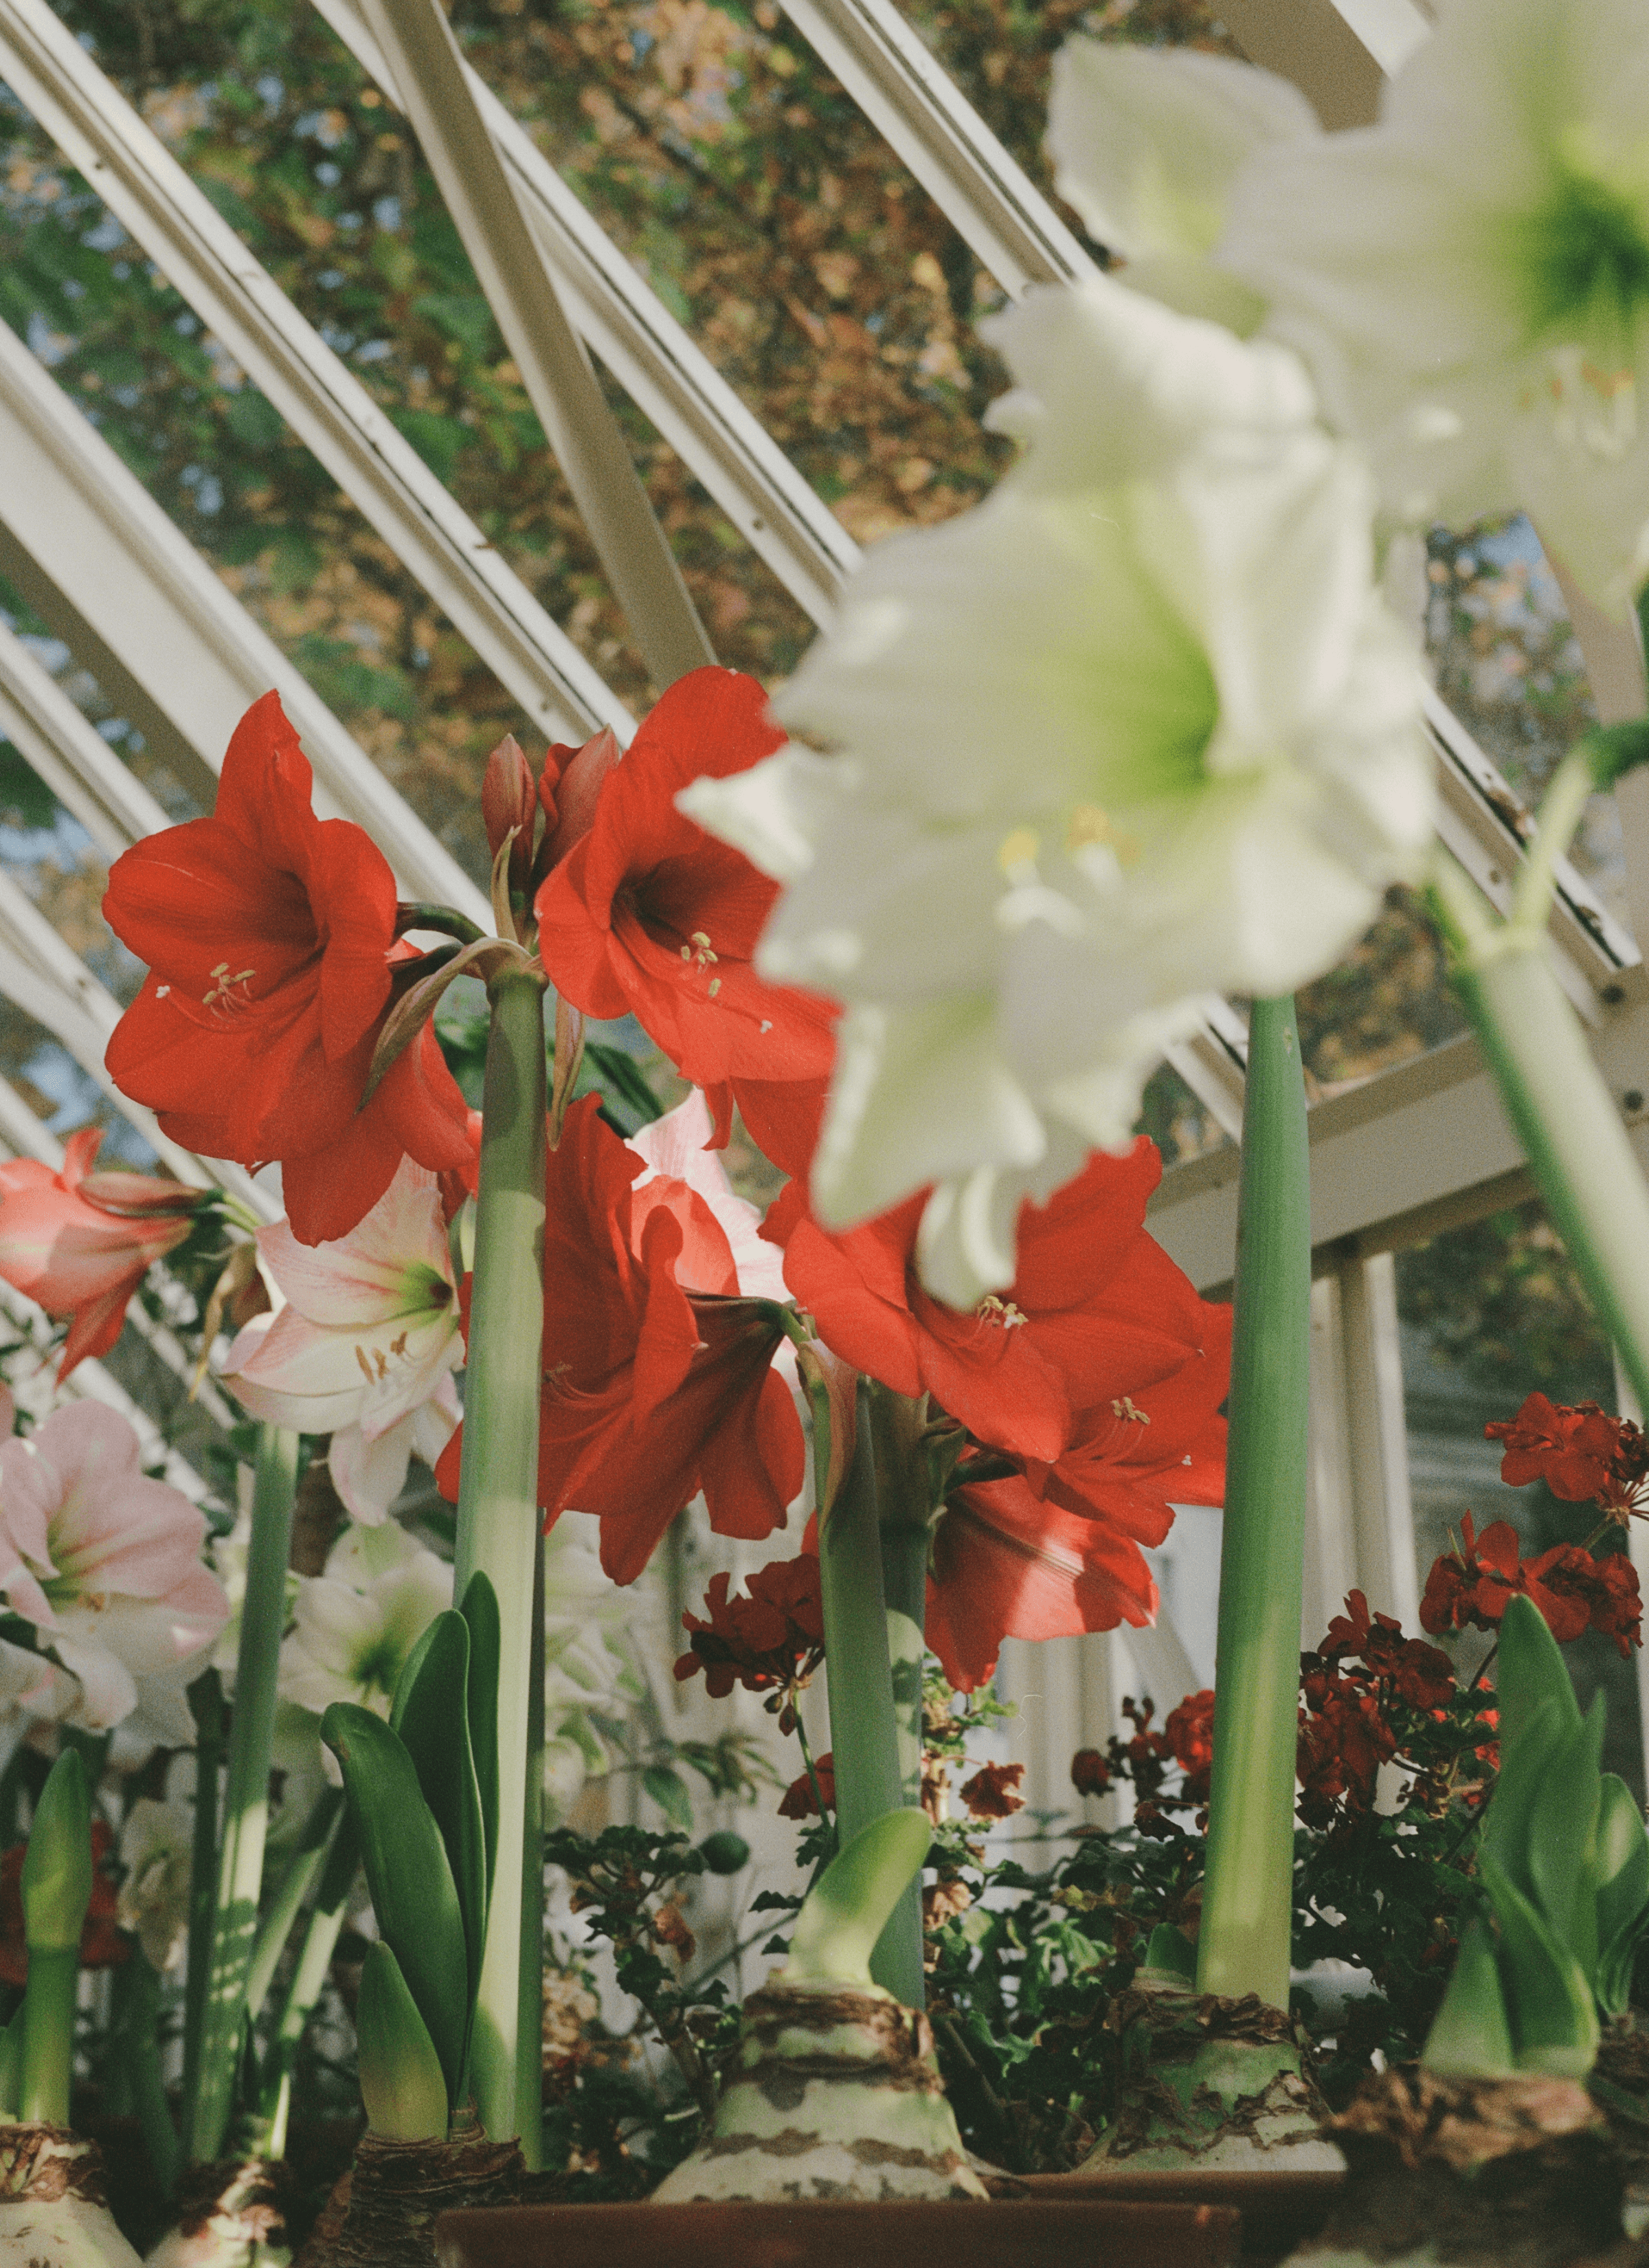 Different colours of Amaryllis grow in a greenhouse while there are some other kinds of flowers behind.